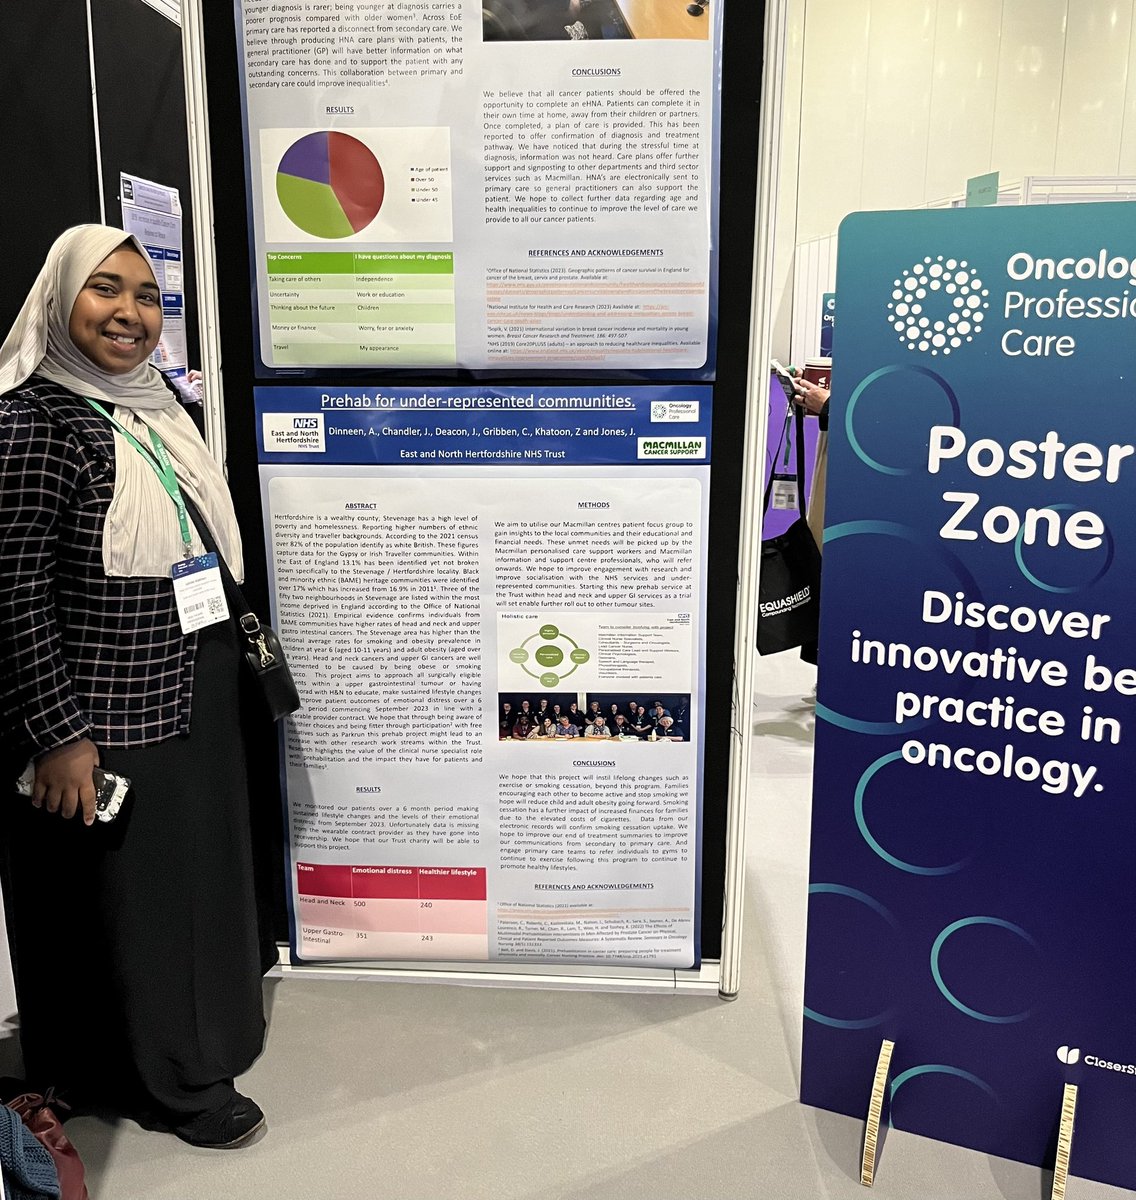 Meet the some of team & view our posters in the poster zone at 12-1 today #OPC24 @oncologycare @macmillancancer @LouizaKribel Shelley, Emo, Rosemary & Zahida @enherts @UKONSmember #PersonalisedCare #Prehab #BreastCancer #UpperGI #HeadandNeck